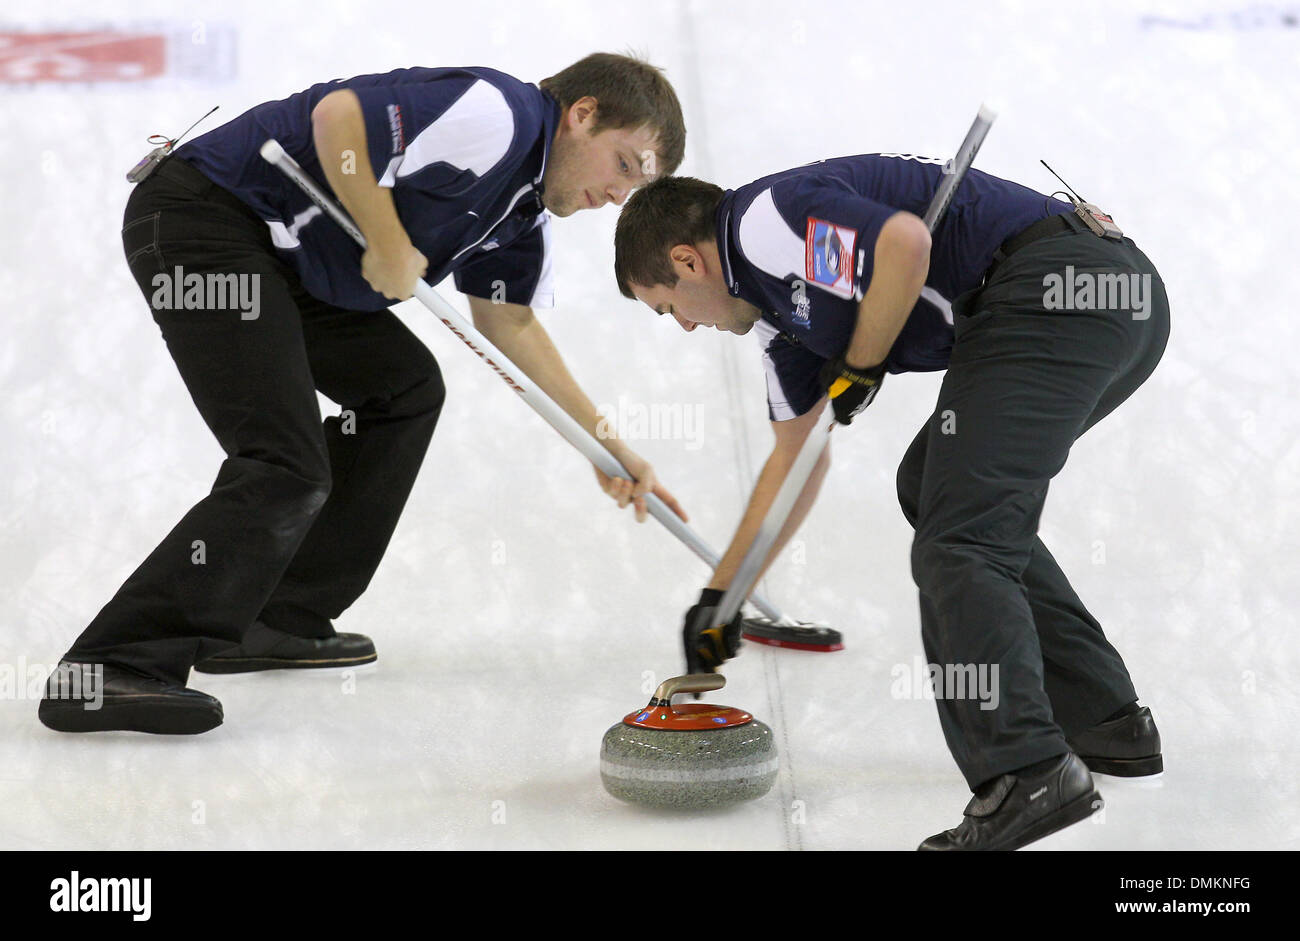 Fuessen, Germany. 15th Dec, 2013. The US curler Jared Zezel (L) and John Landsteiner during the game against Czechia for the qualification for the olympics at the Arena in Fuessen, Germany, 15 December 2013. Photo: Karl-Josef Hildenbrand/dpa/Alamy Live News Stock Photo